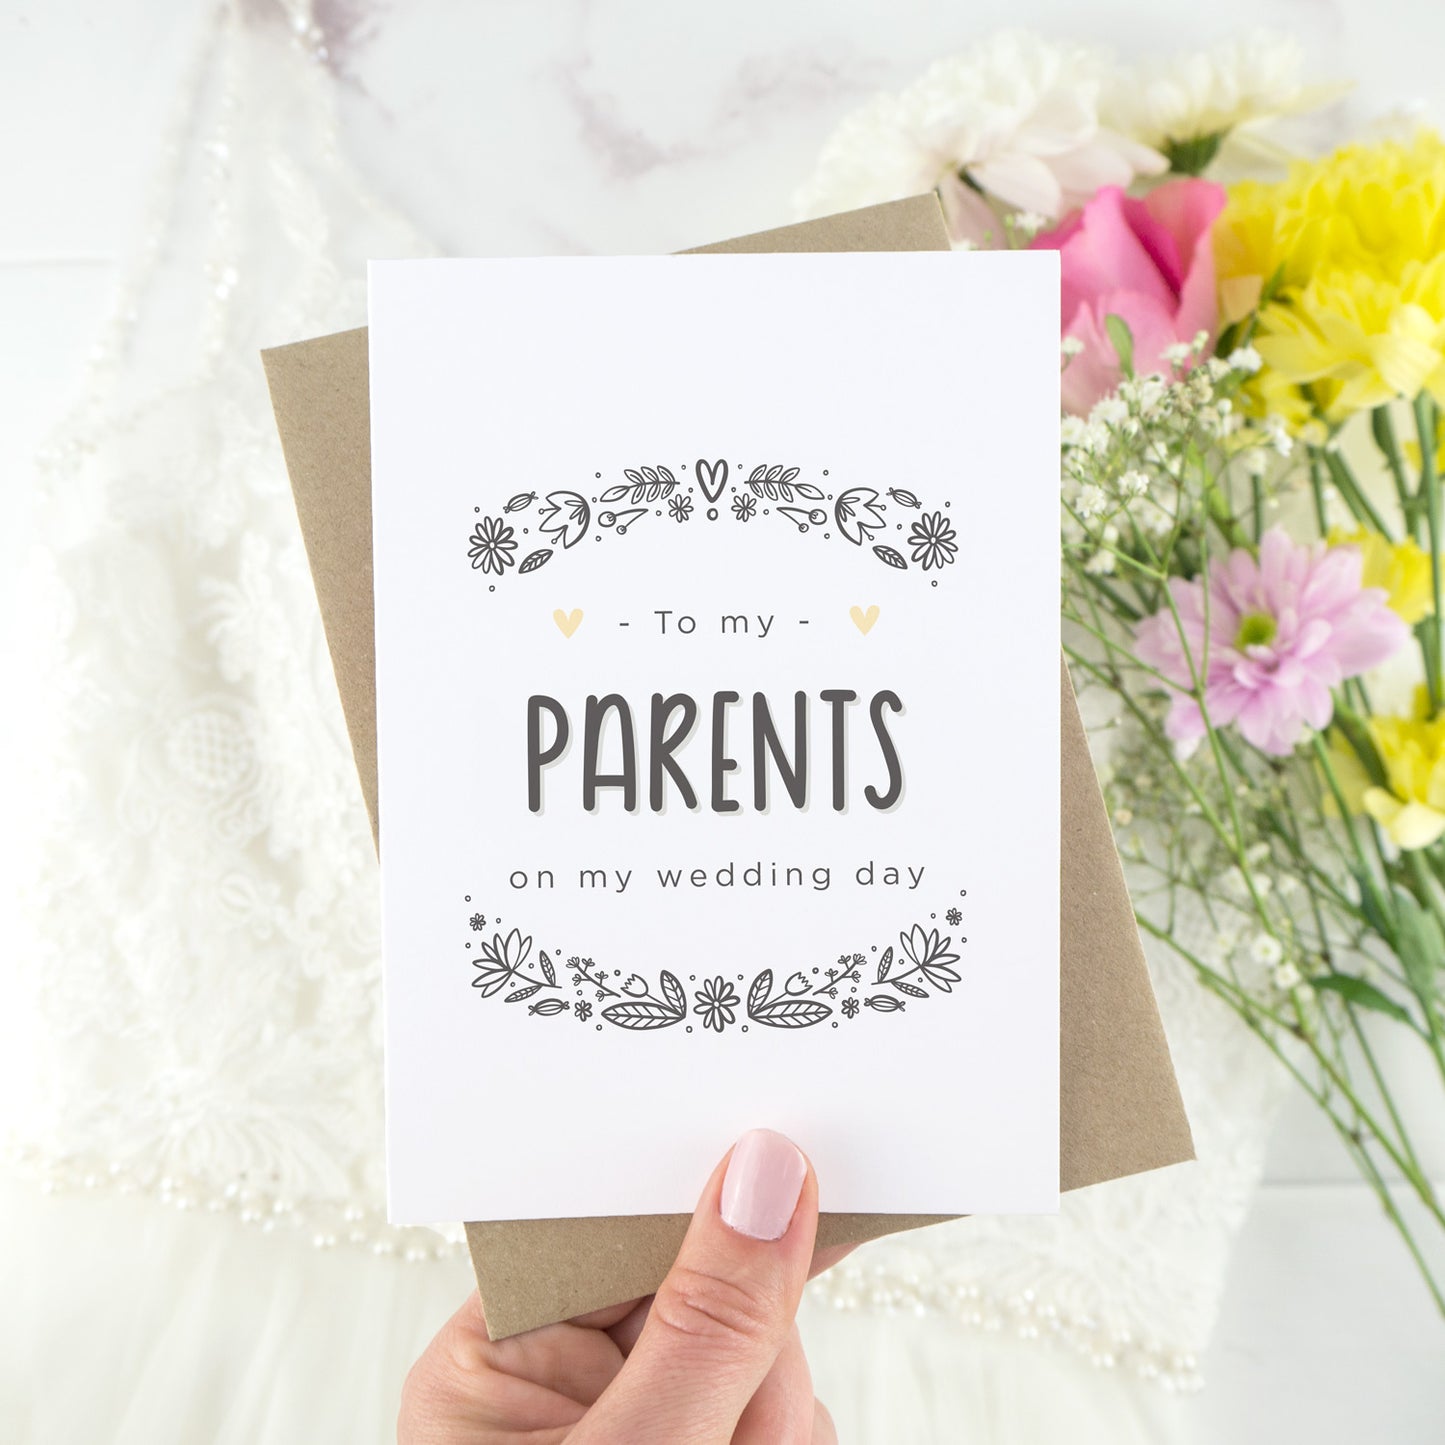 To my parents on my wedding day. A white card with grey hand drawn lettering, and a grey floral border. The image features a wedding dress and bouquet of flowers.